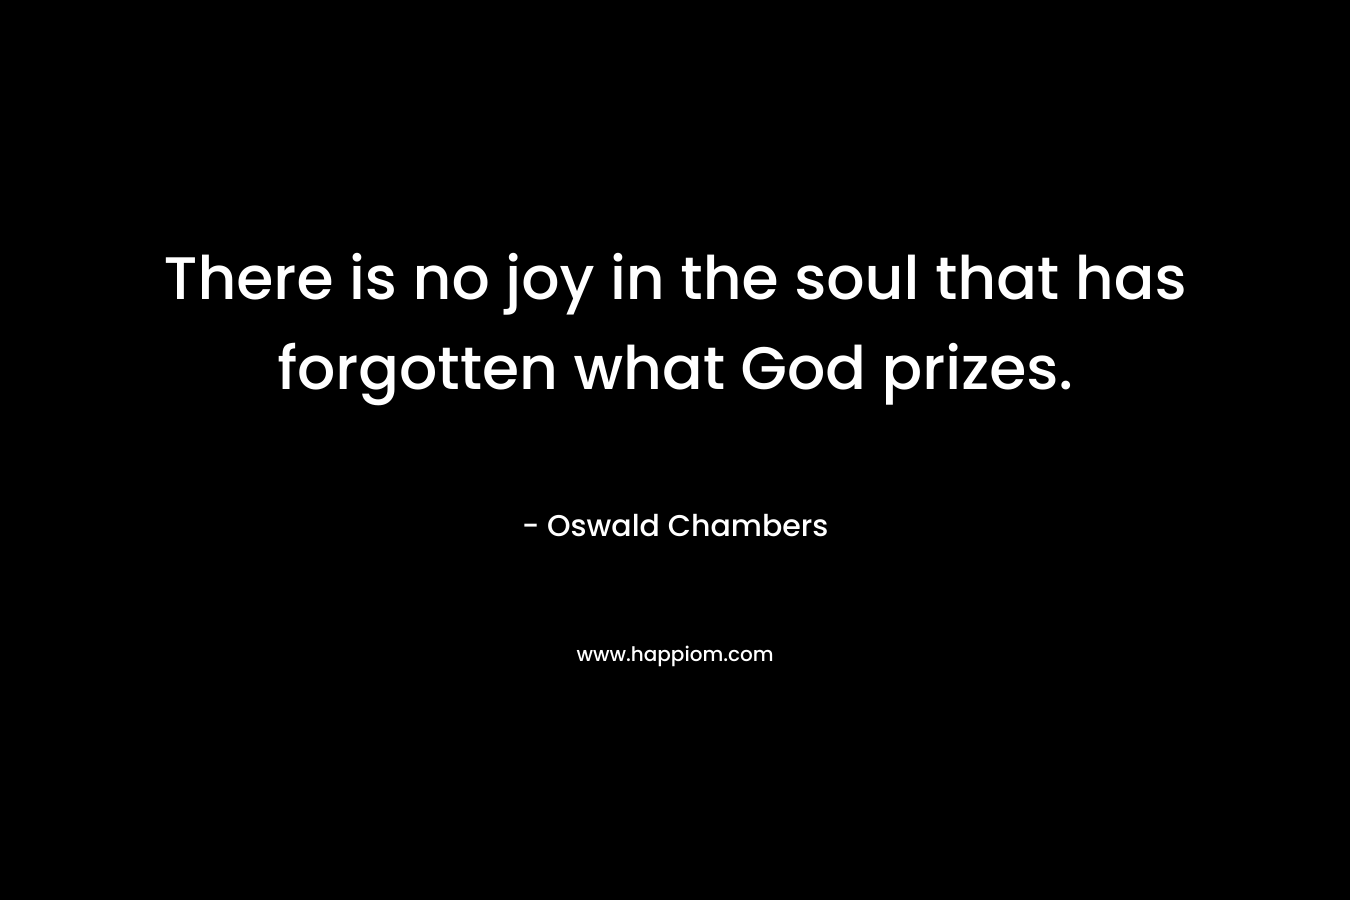 There is no joy in the soul that has forgotten what God prizes.